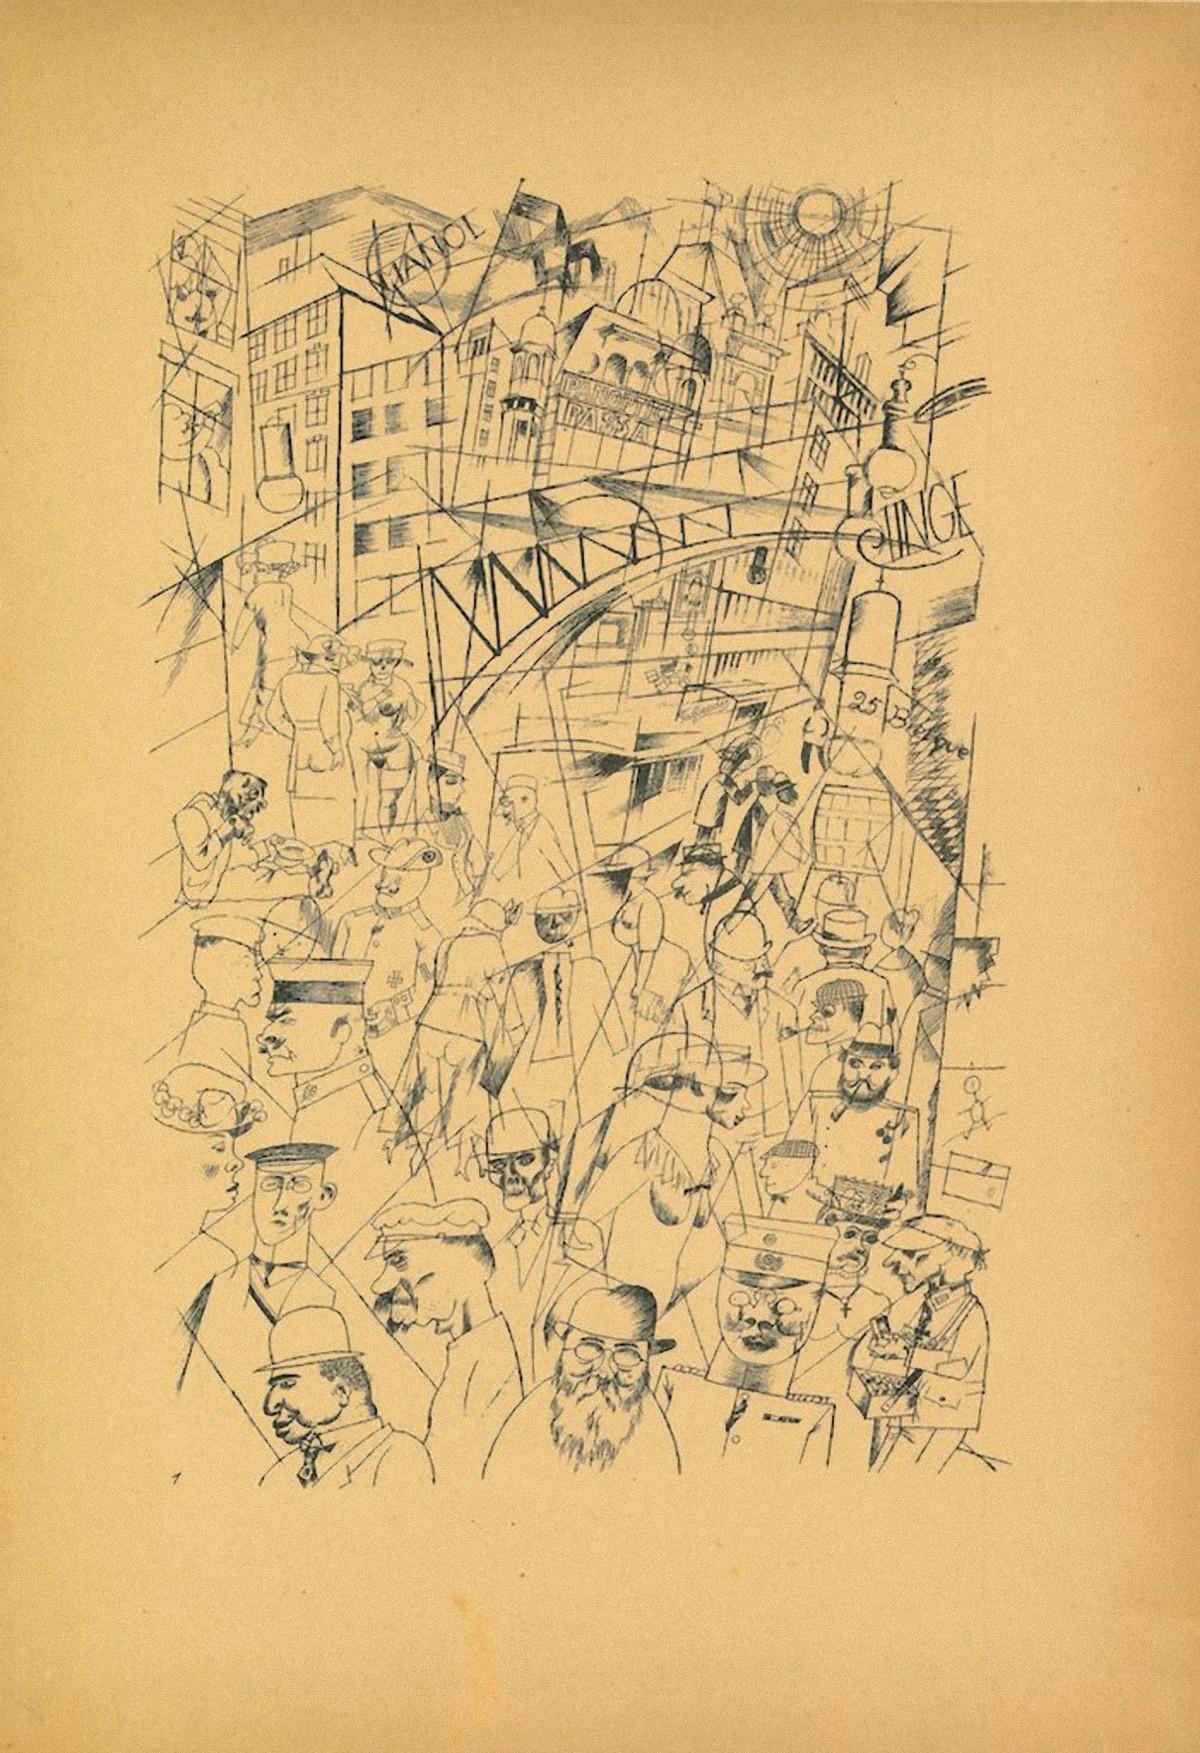 Friedrichstrasse is an original offset and lithograph print realized by George Grosz.

The artwork is the plate n. 1 from the portfolio Ecce Homo published between 1922/1923, edition of Der Malik-Verlag Berlin.

Original title: Friedrichstraße

Good